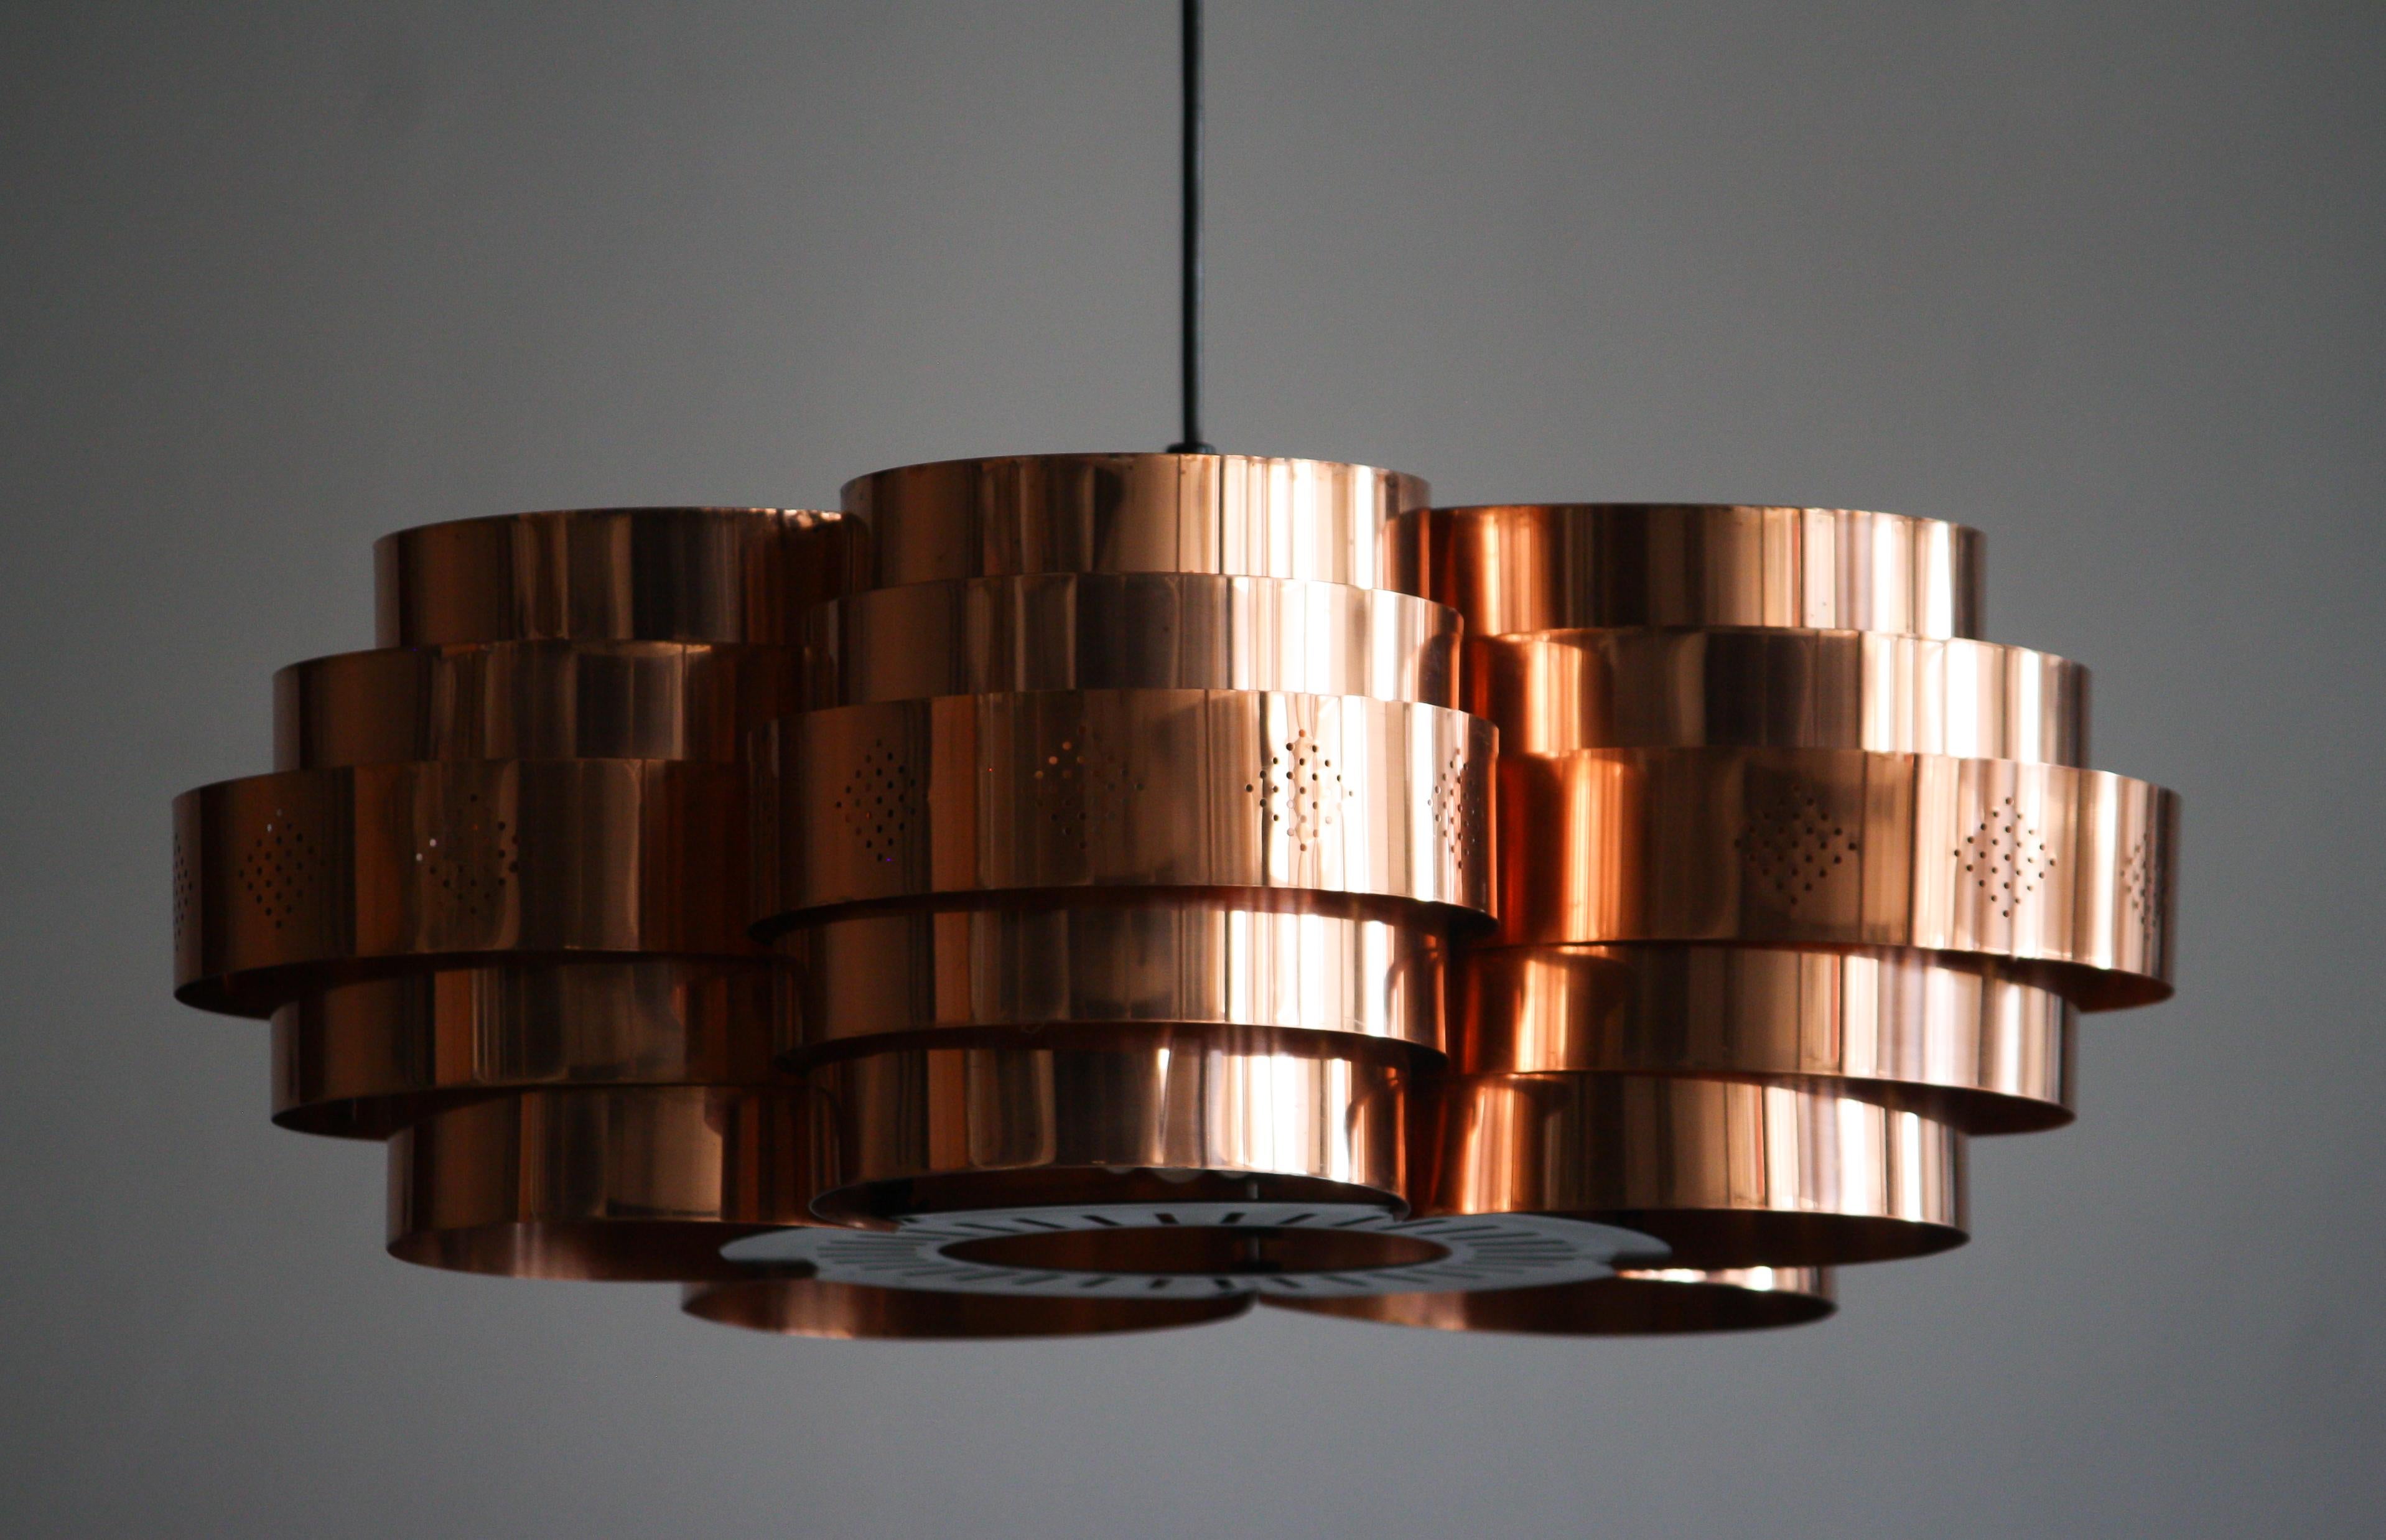 Beautiful copper pendant designed by Verner Schou and manufactured by Coronell Elektro, Denmark.
The lamp has a fabulous four-leaf clover shape with five variable tiers with giving a warm diffused lighting.
Period 1960s
Dimensions: H 19 cm, ø 50